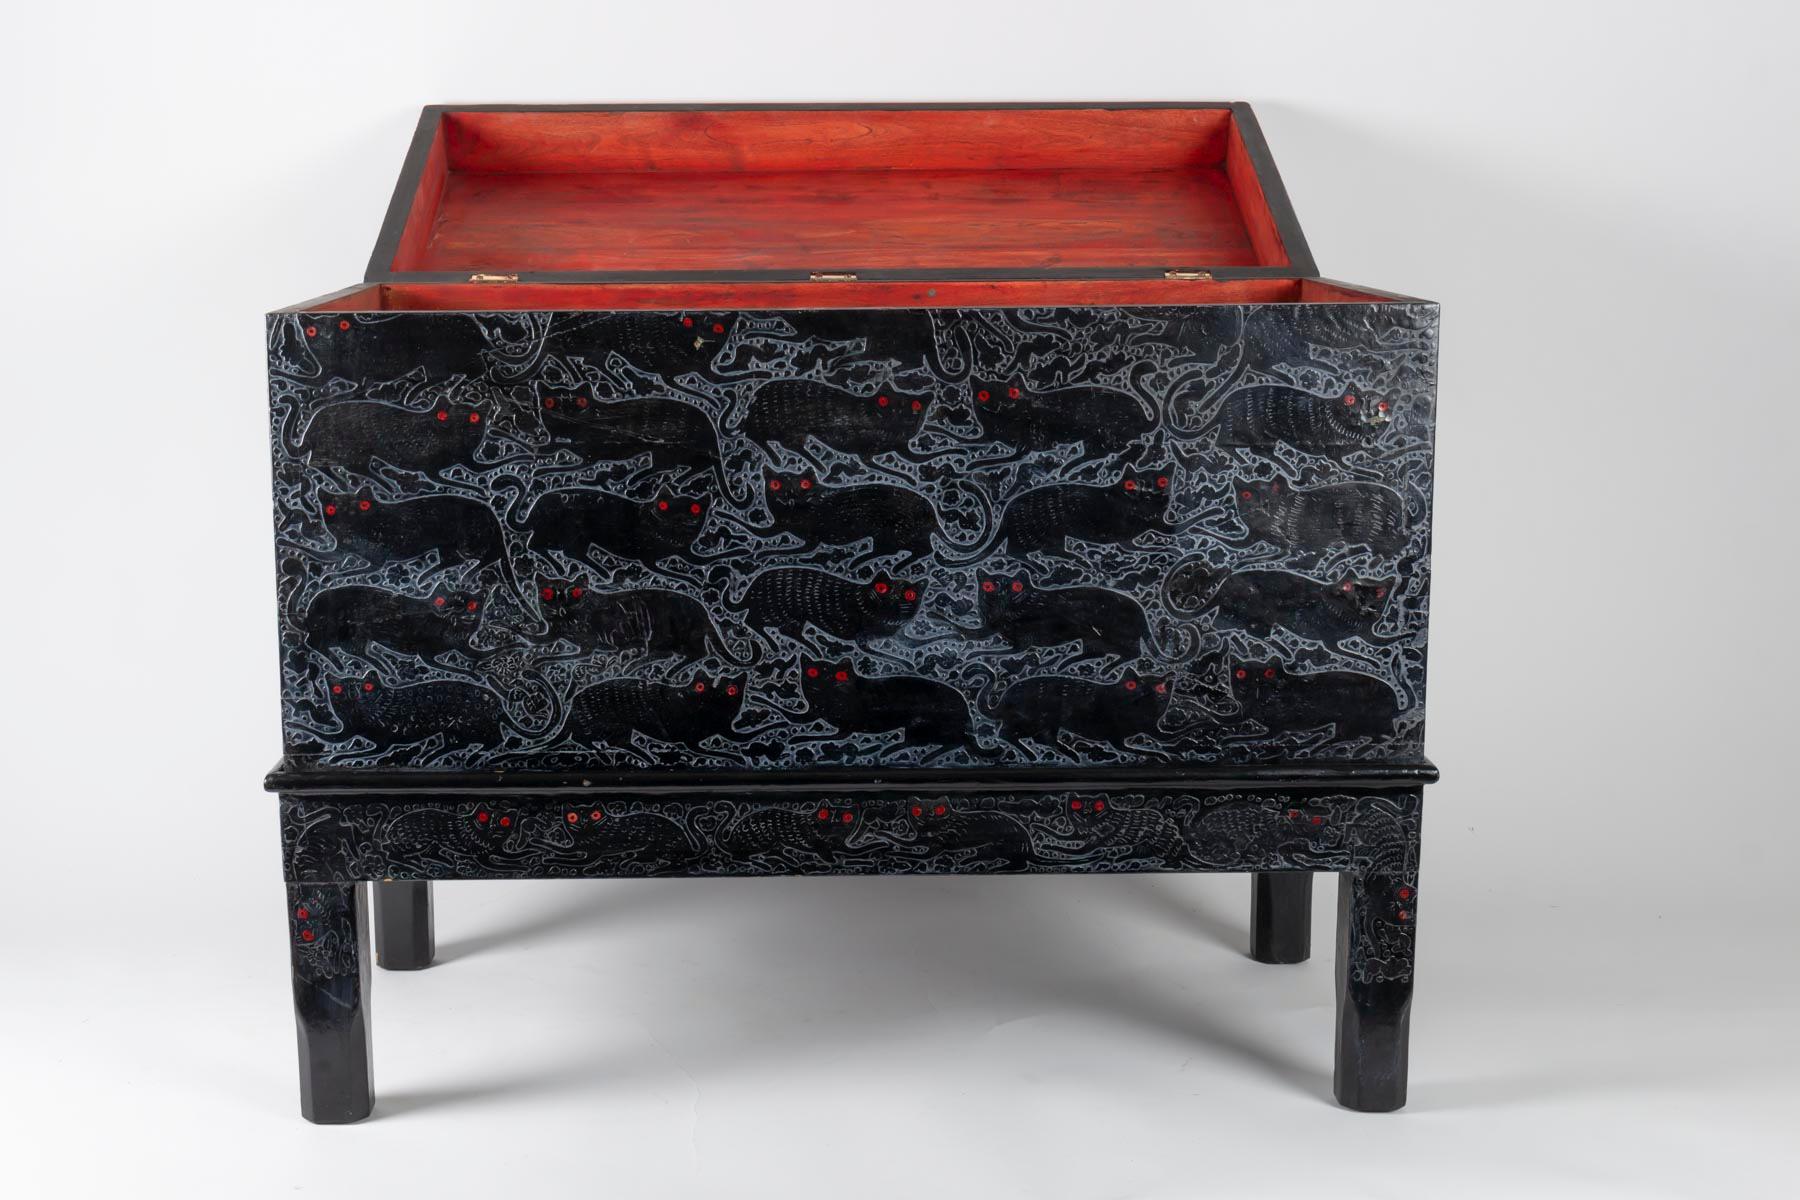 Lacquered Chest on its Lacquer Base, 1930, Art Deco with Red Eyes Cat Decorations